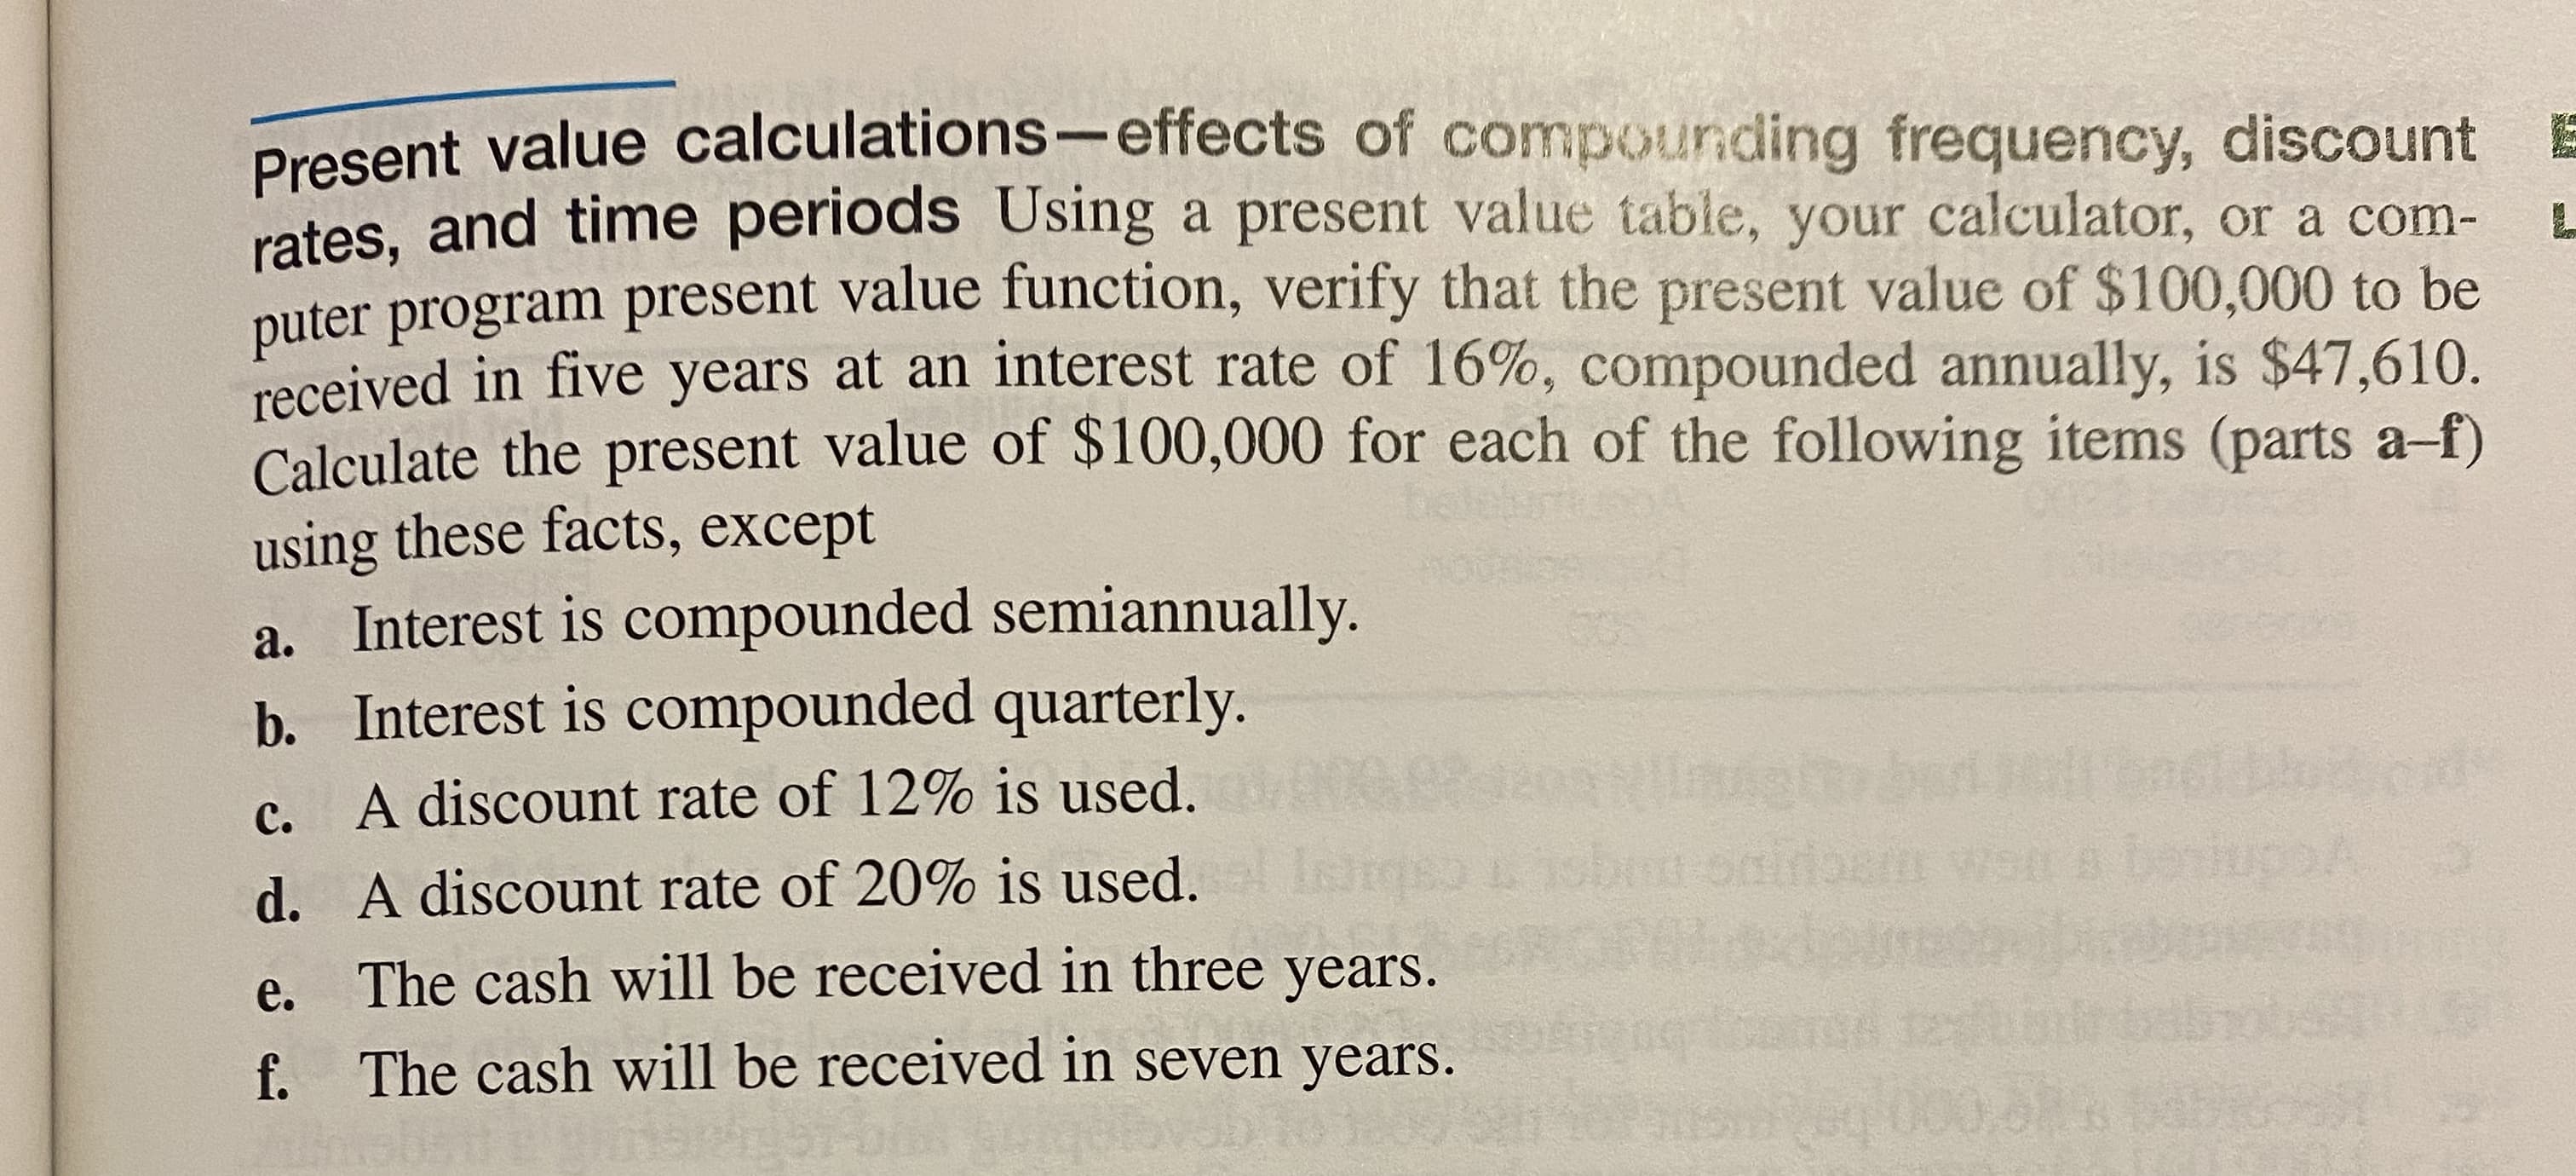 rates, and time periods Using a present value table, your calculator, or a com-
puter program present value function, verify that the present value of $100,000 to be
received in five years at an interest rate of 16%, compounded annually, is $47,610.
Calculate the present value of $100,000 for each of the following items (parts a-f)
using these facts, except
a. Interest is compounded semiannually.
b. Interest is compounded quarterly.
c. A discount rate of 12% is used.
bou
d. A discount rate of 20% is used.
е.
The cash will be received in three years.
f.
The cash will be received in seven years.
